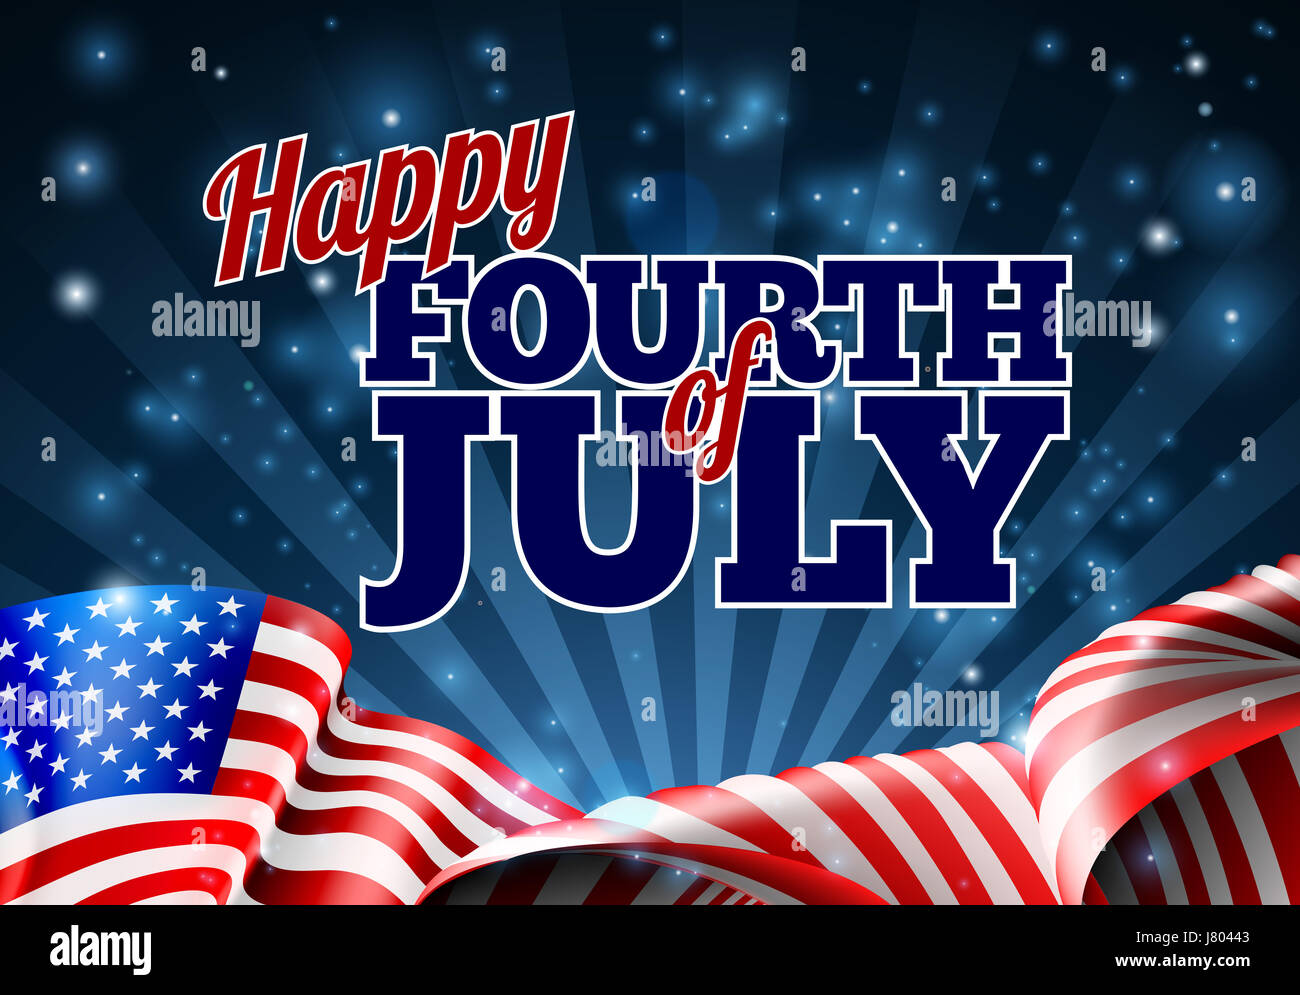 Happy Fourth of July Independence Day background with an American Flag design Stock Photo